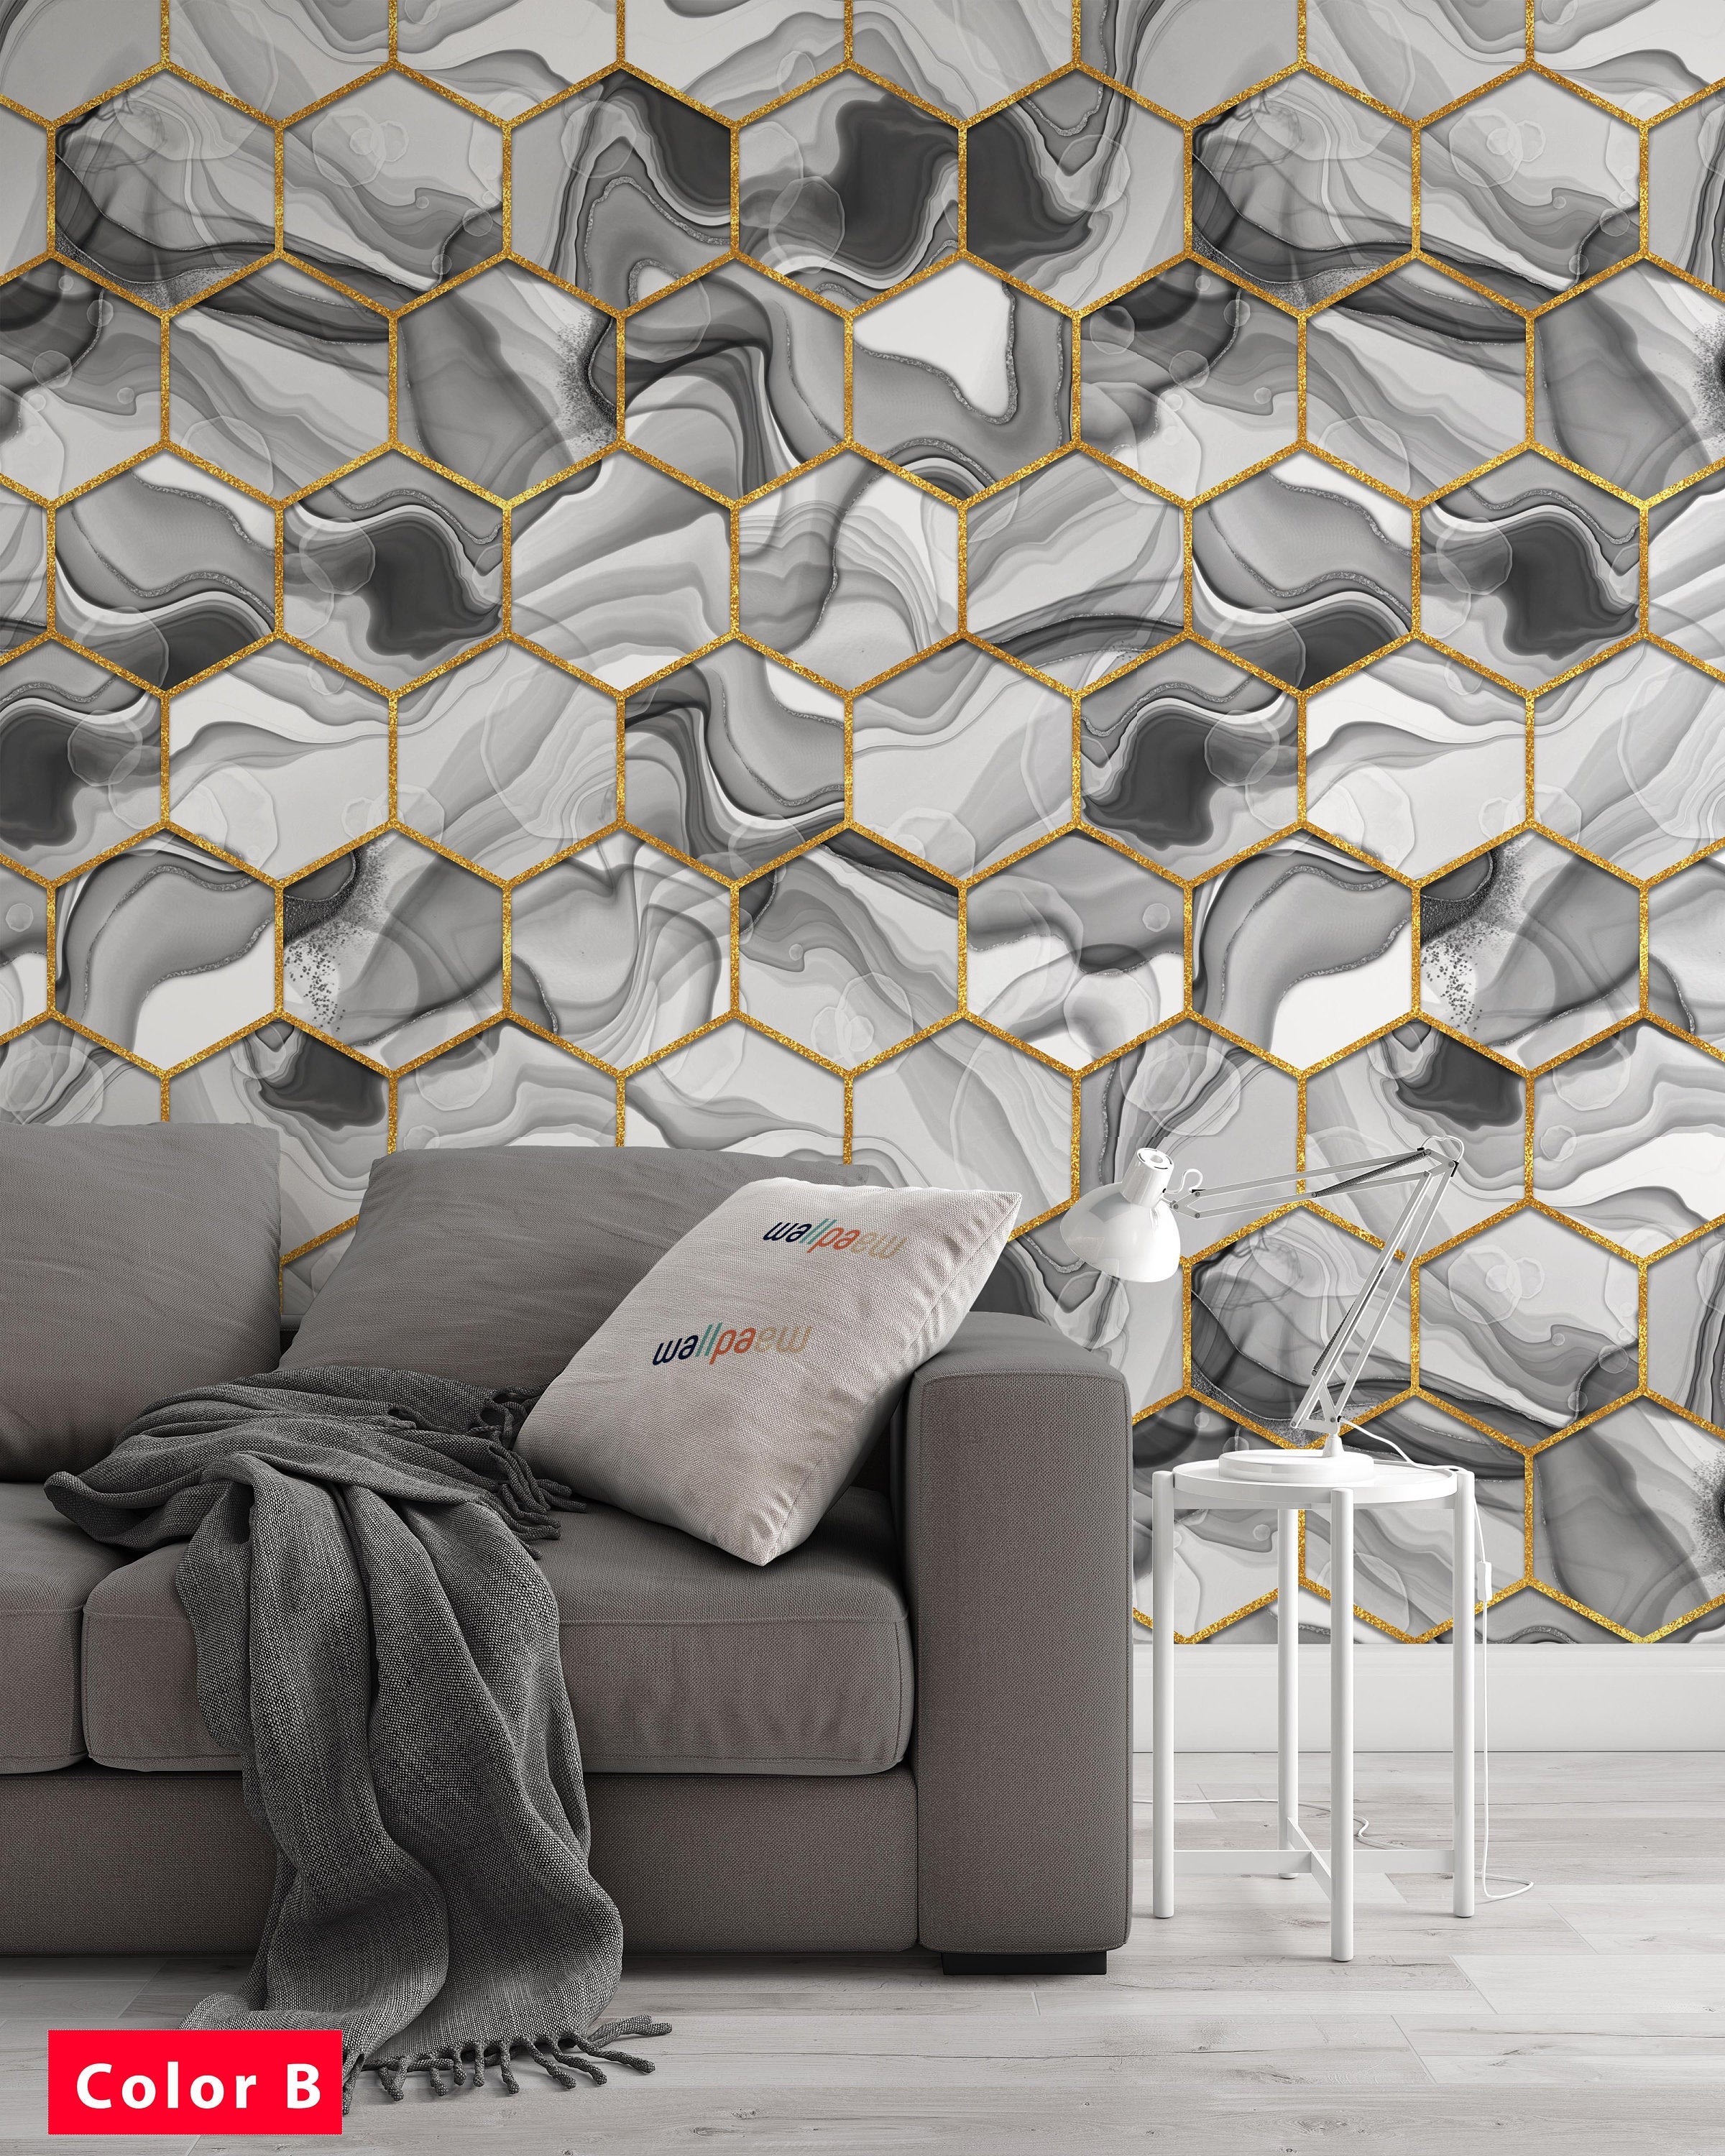 Hexagon Texture Abstract Gray Pink and Black Trendy Background Wallpaper Self Adhesive Peel & Stick Wall Sticker Wall Decoration